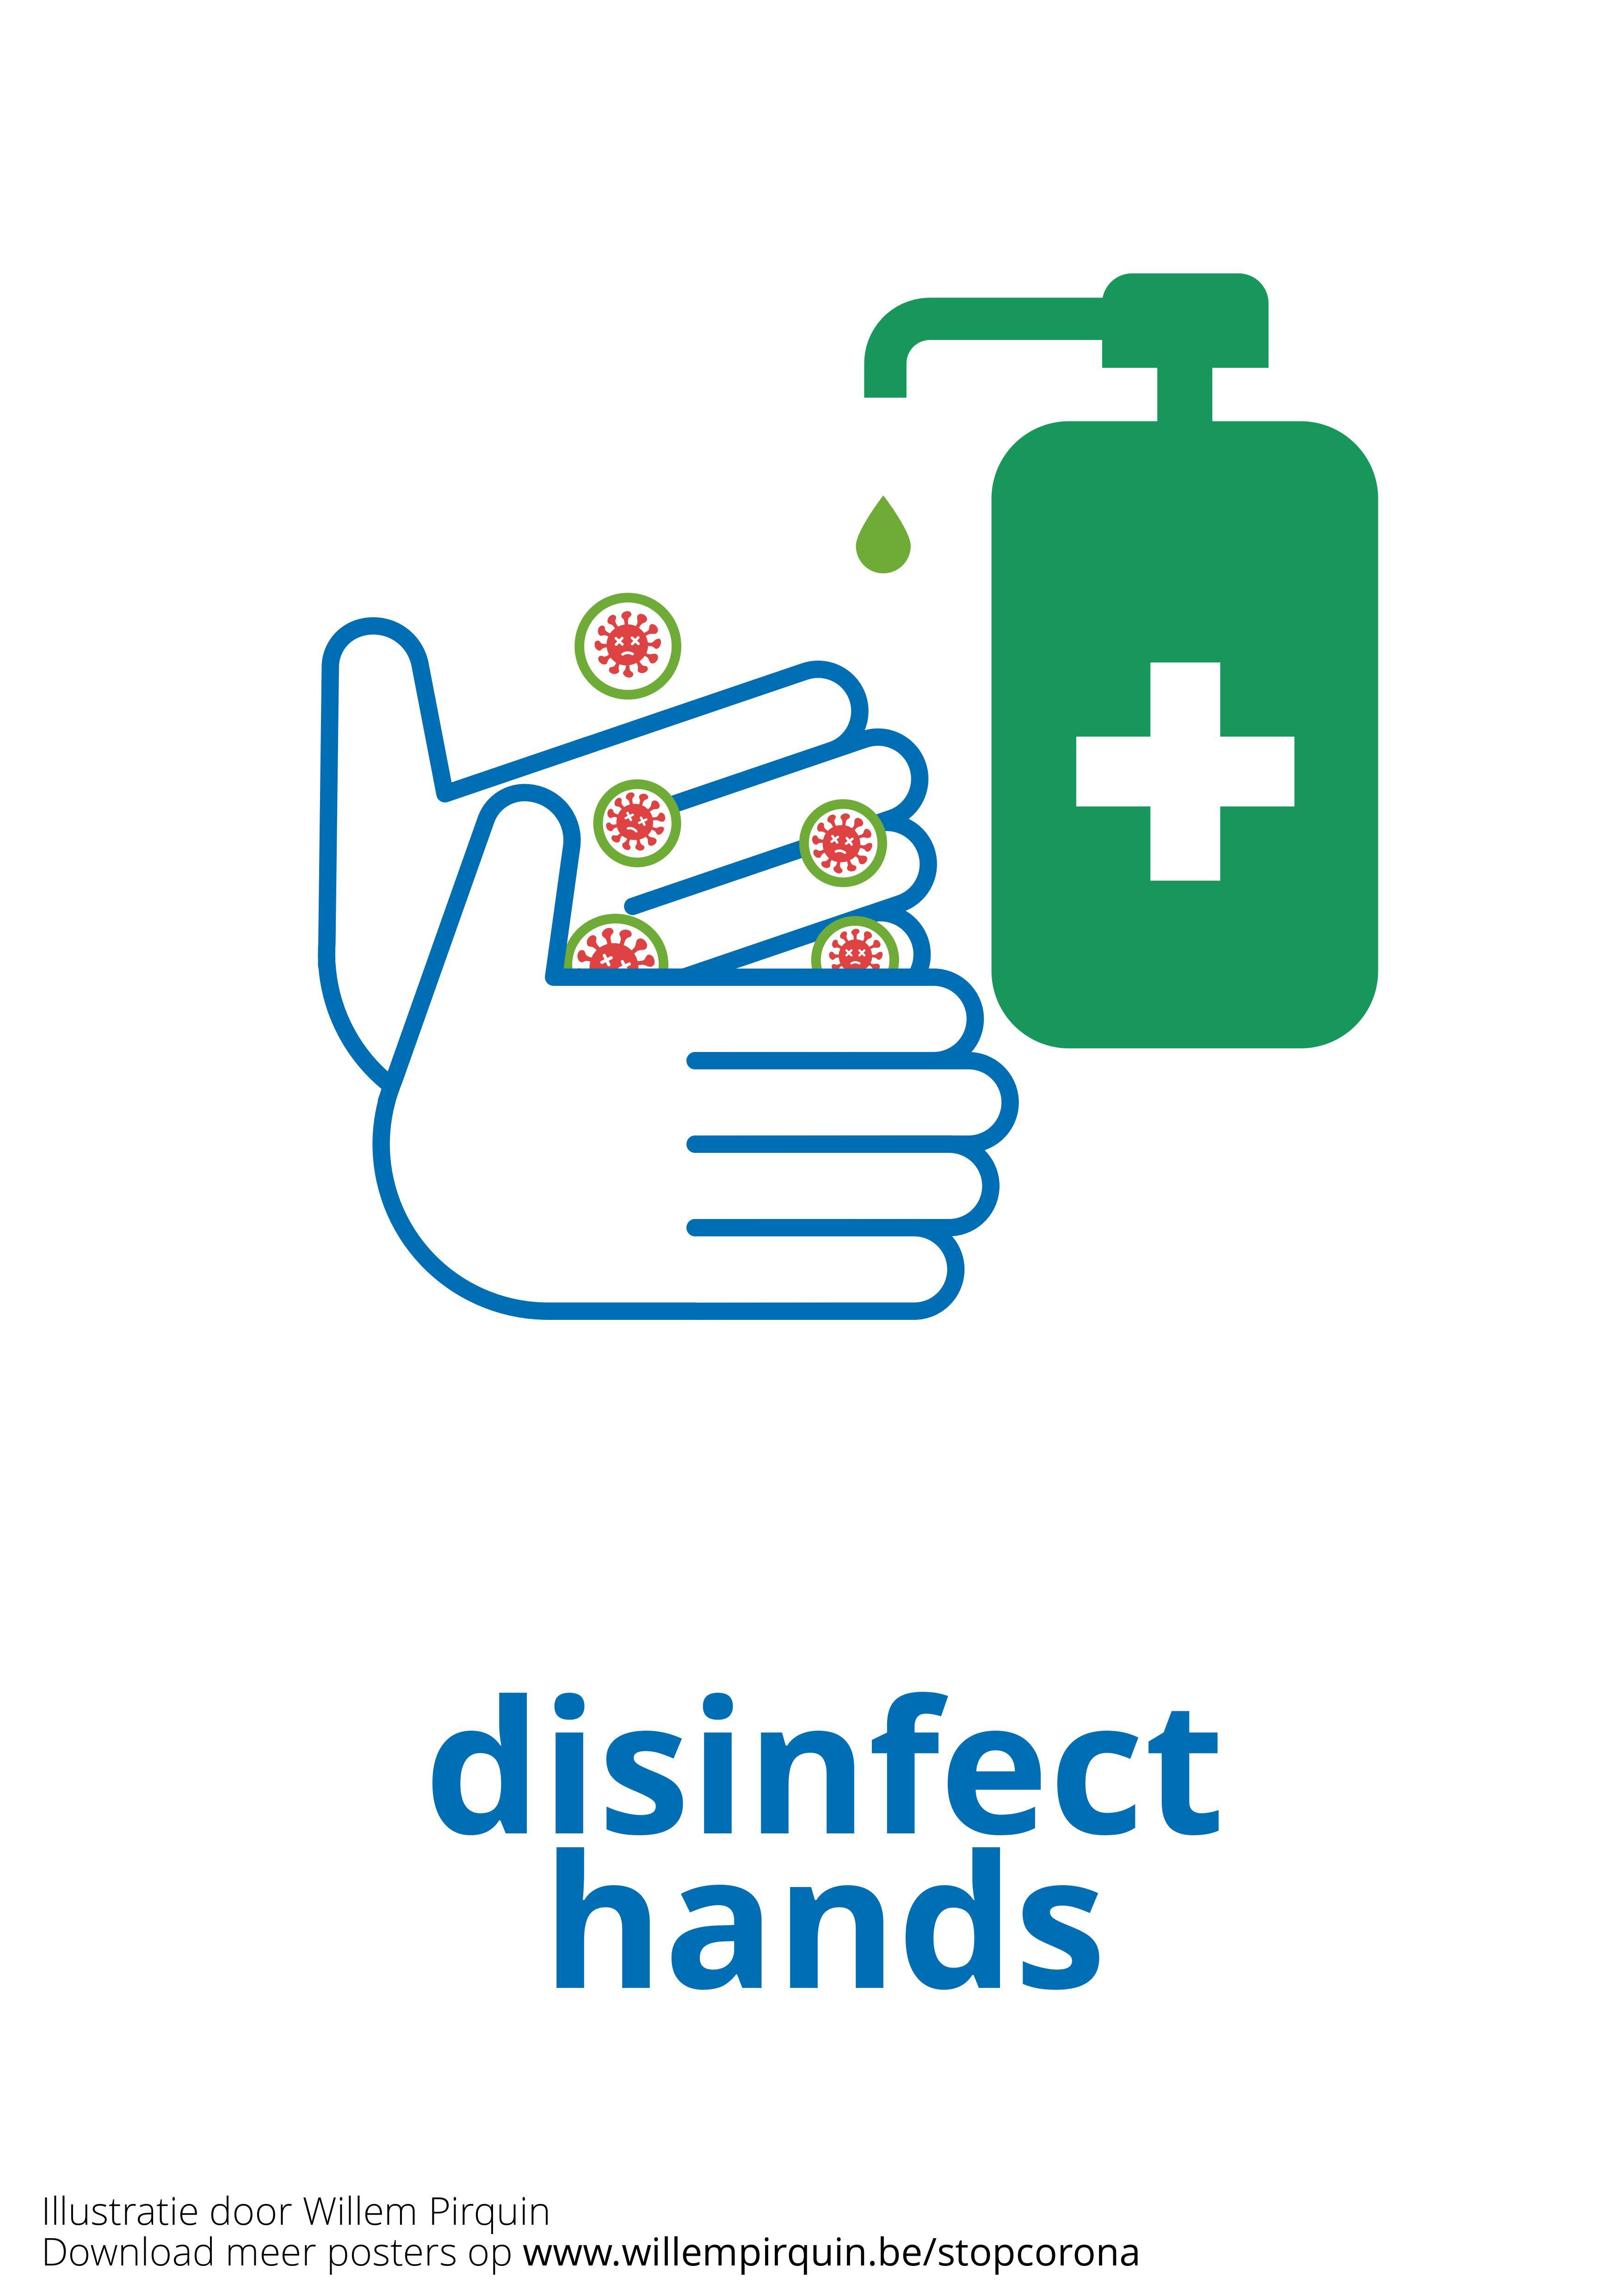 Image disinfect your hands